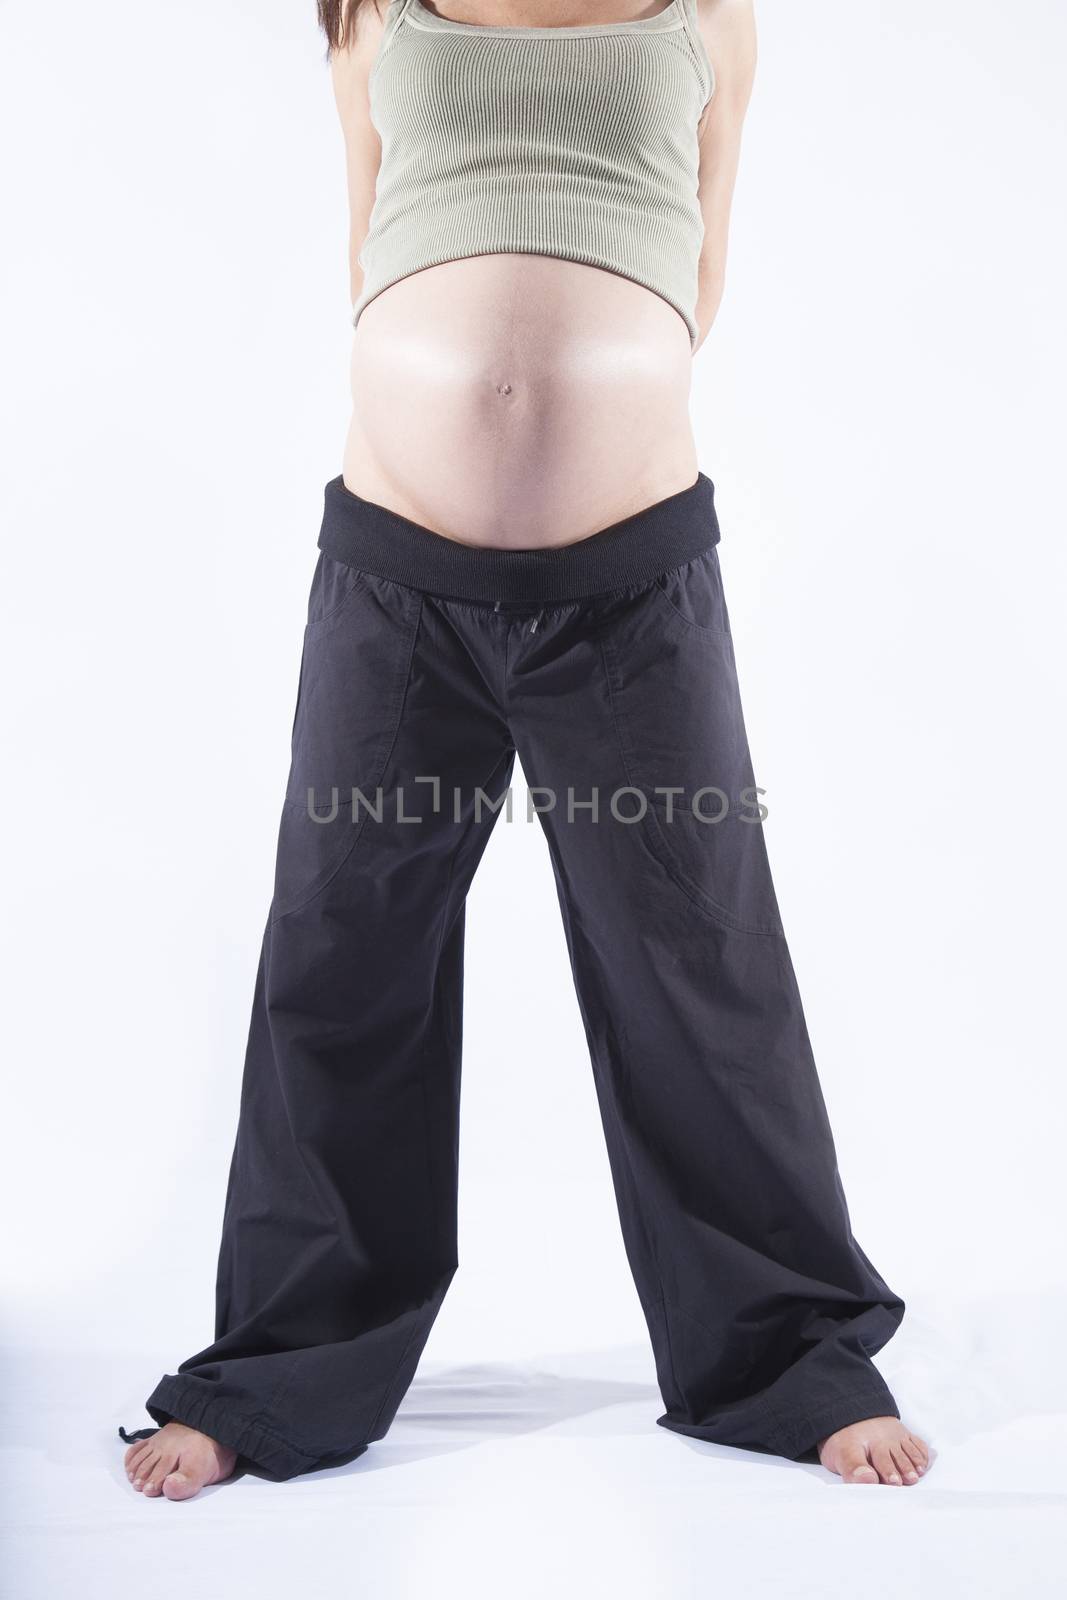 front eight month brunette pregnant woman naked paunch standing black trousers isolated over white background